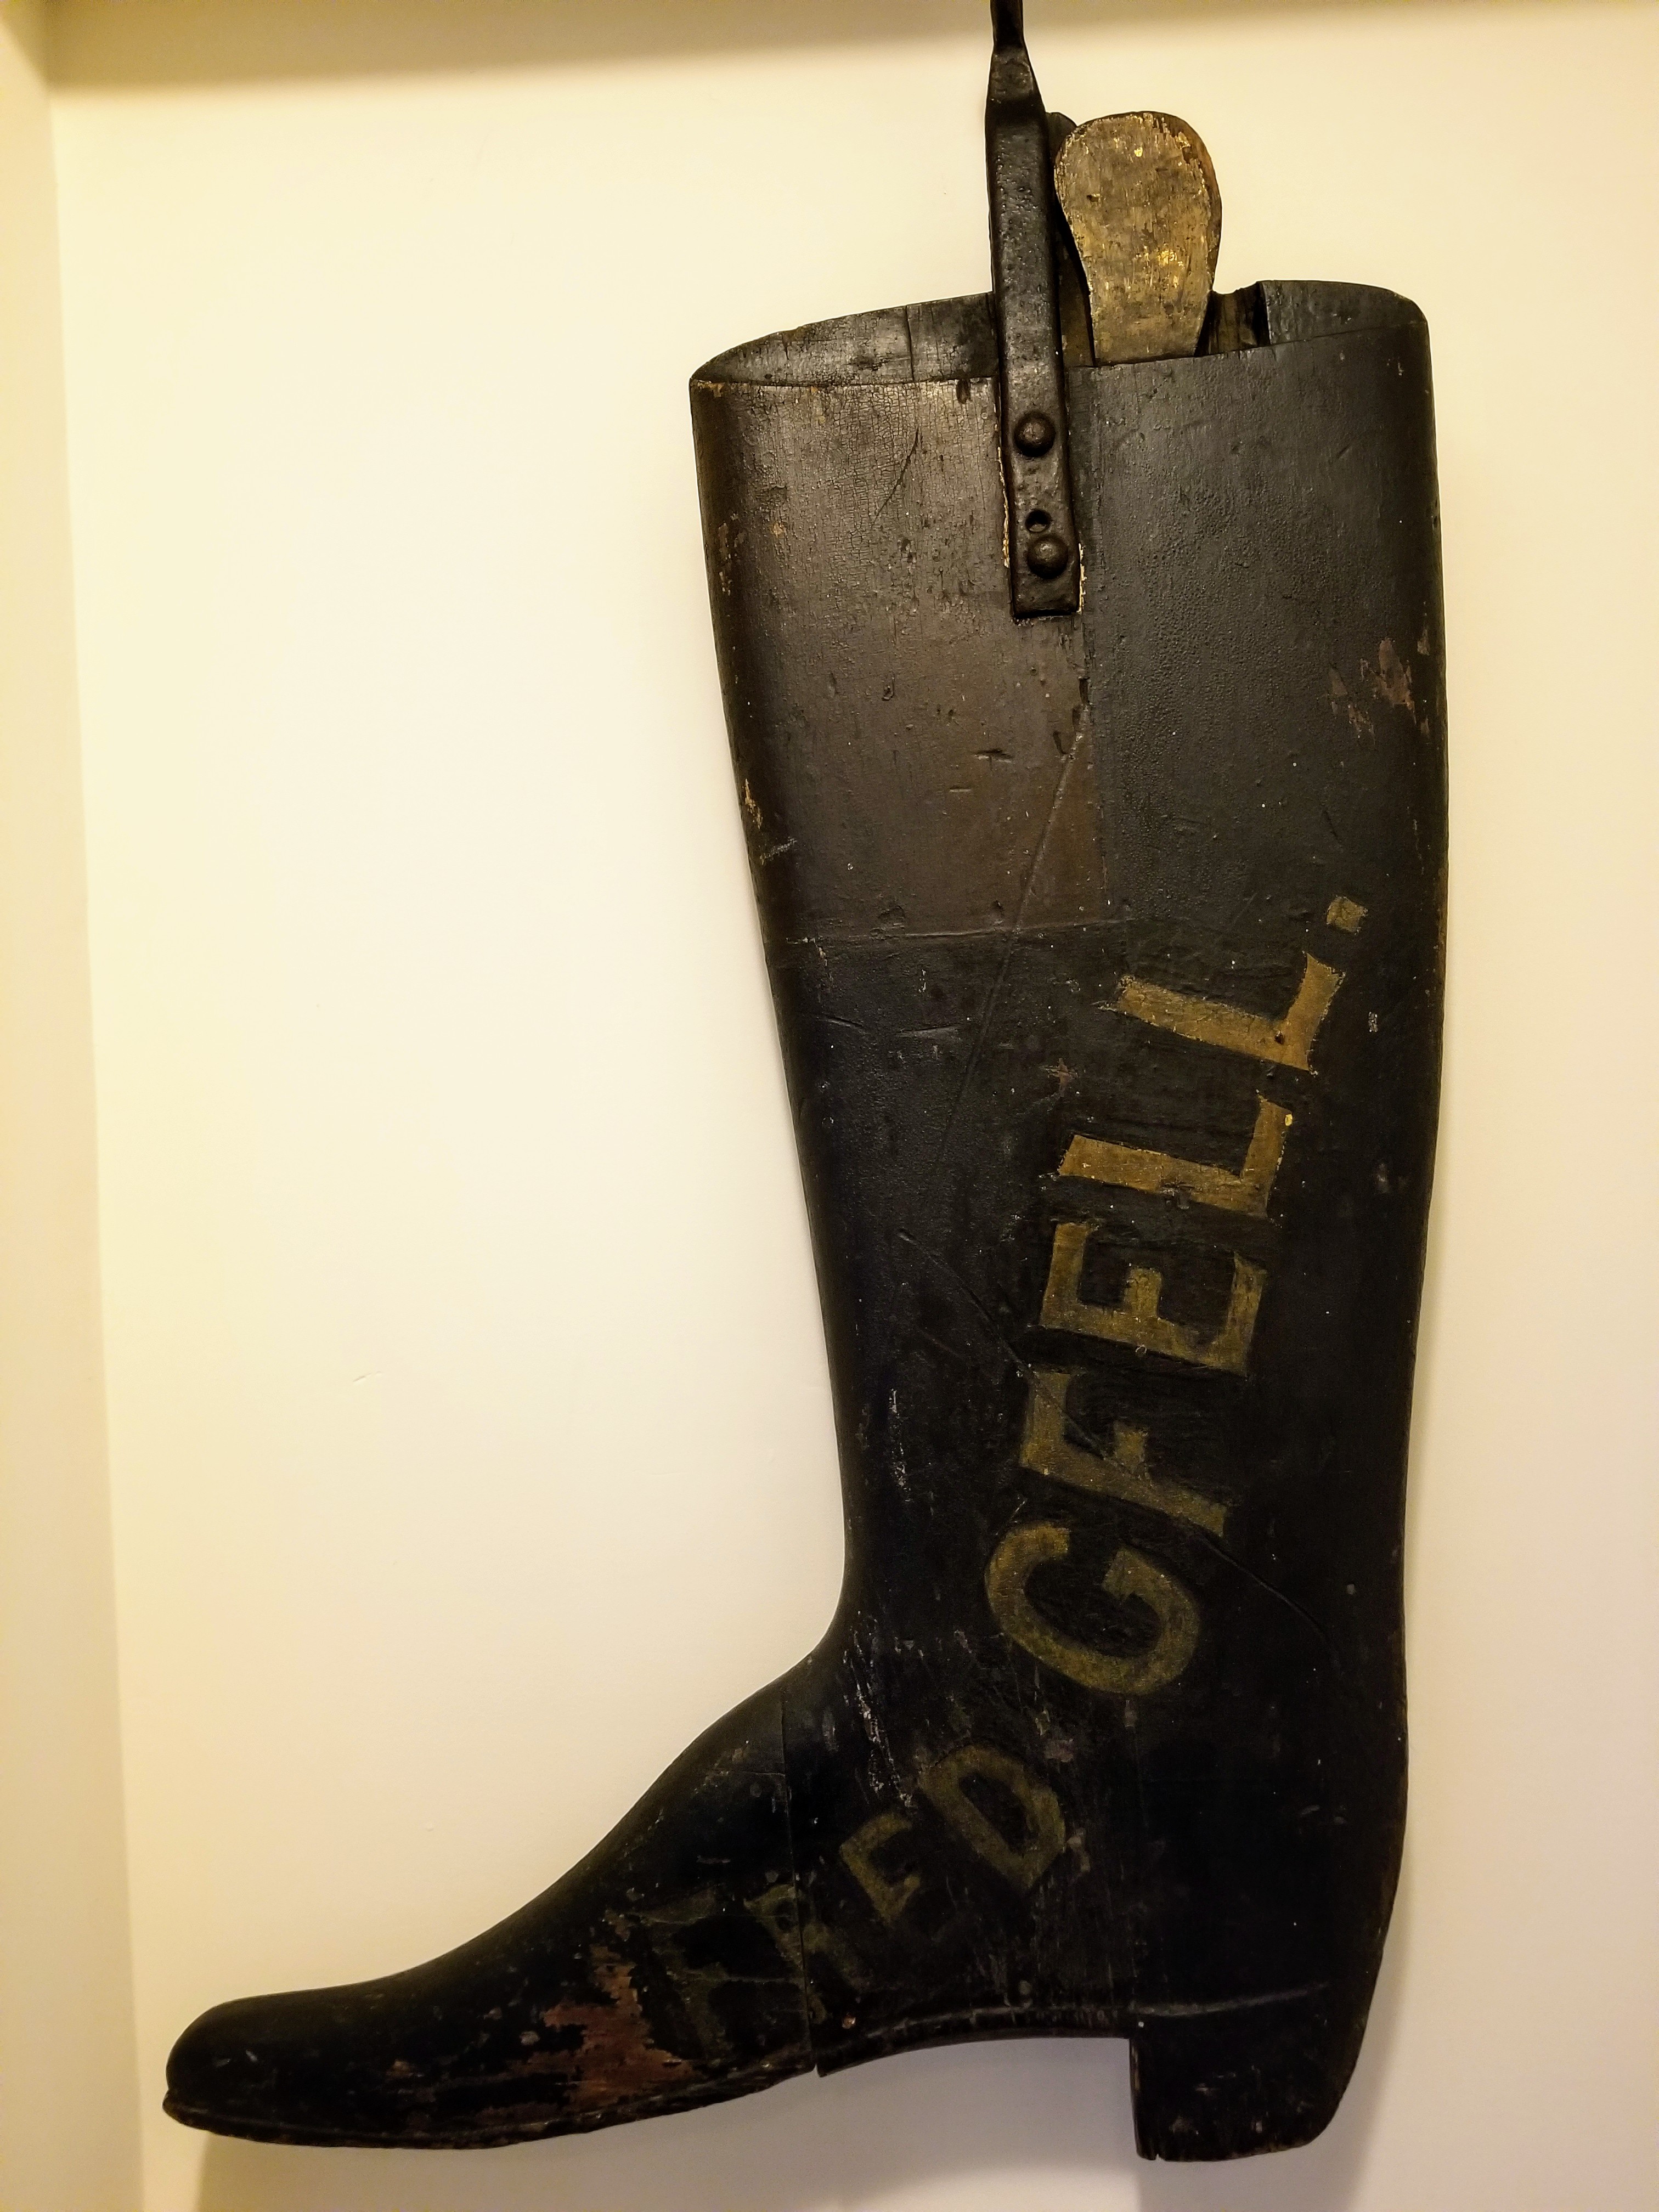 LARGE WHIMICAL BOOT IN PAINT